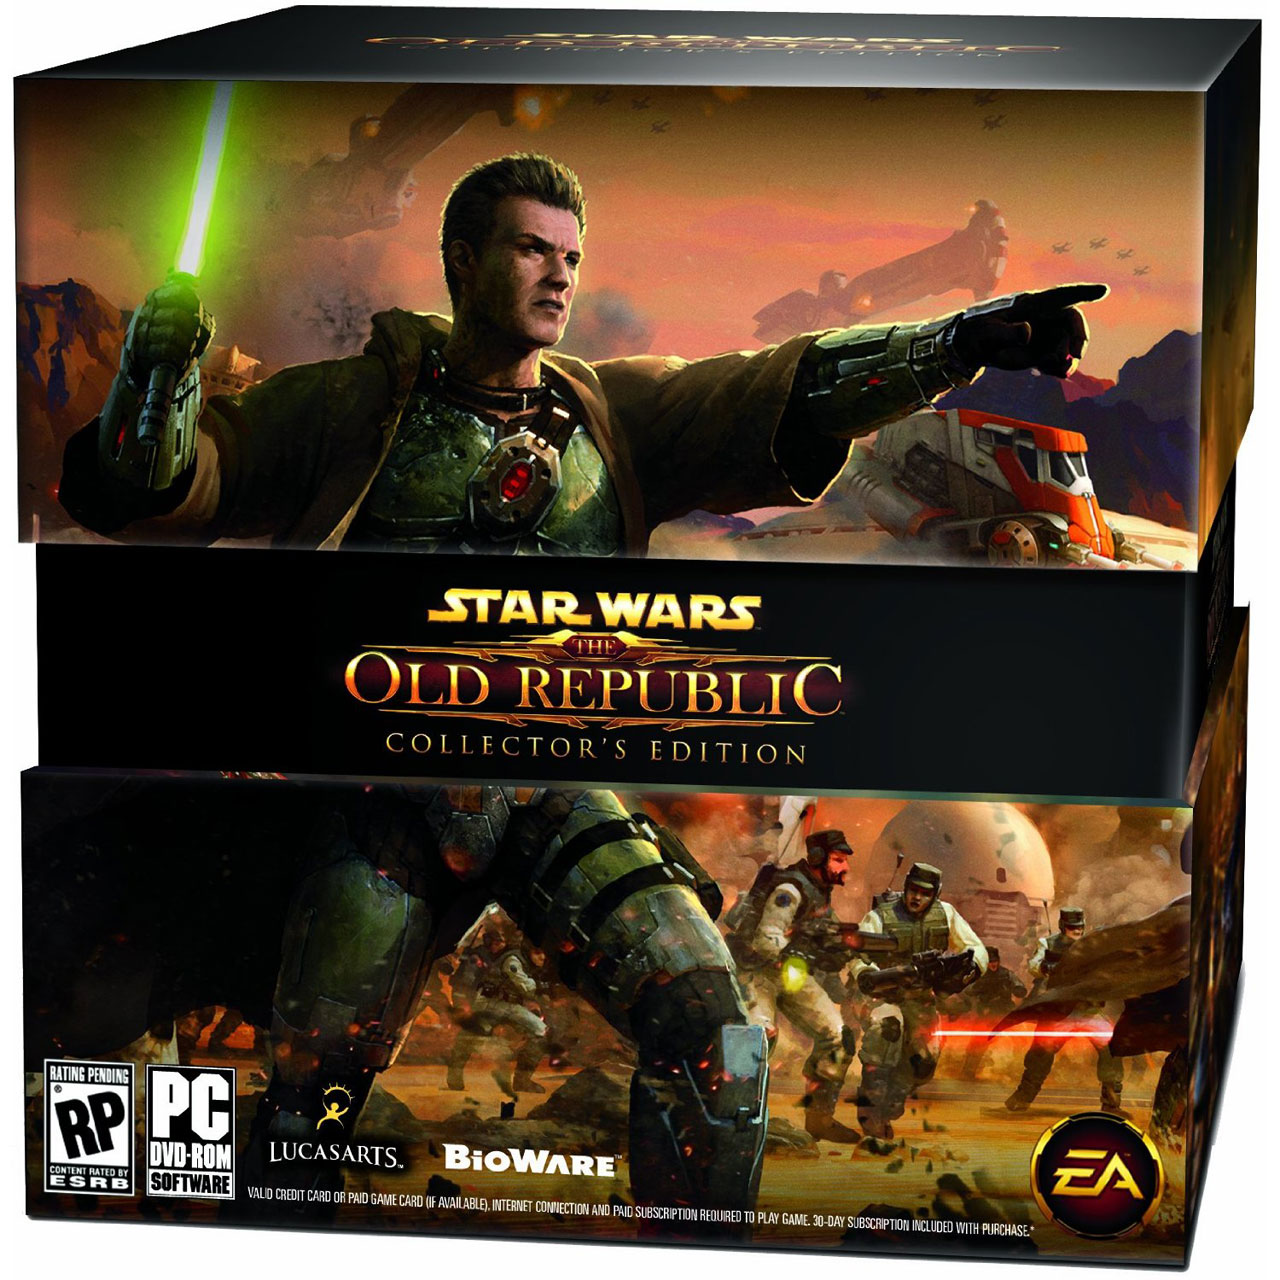 Star Wars - The Old Republic: Collectors Edition